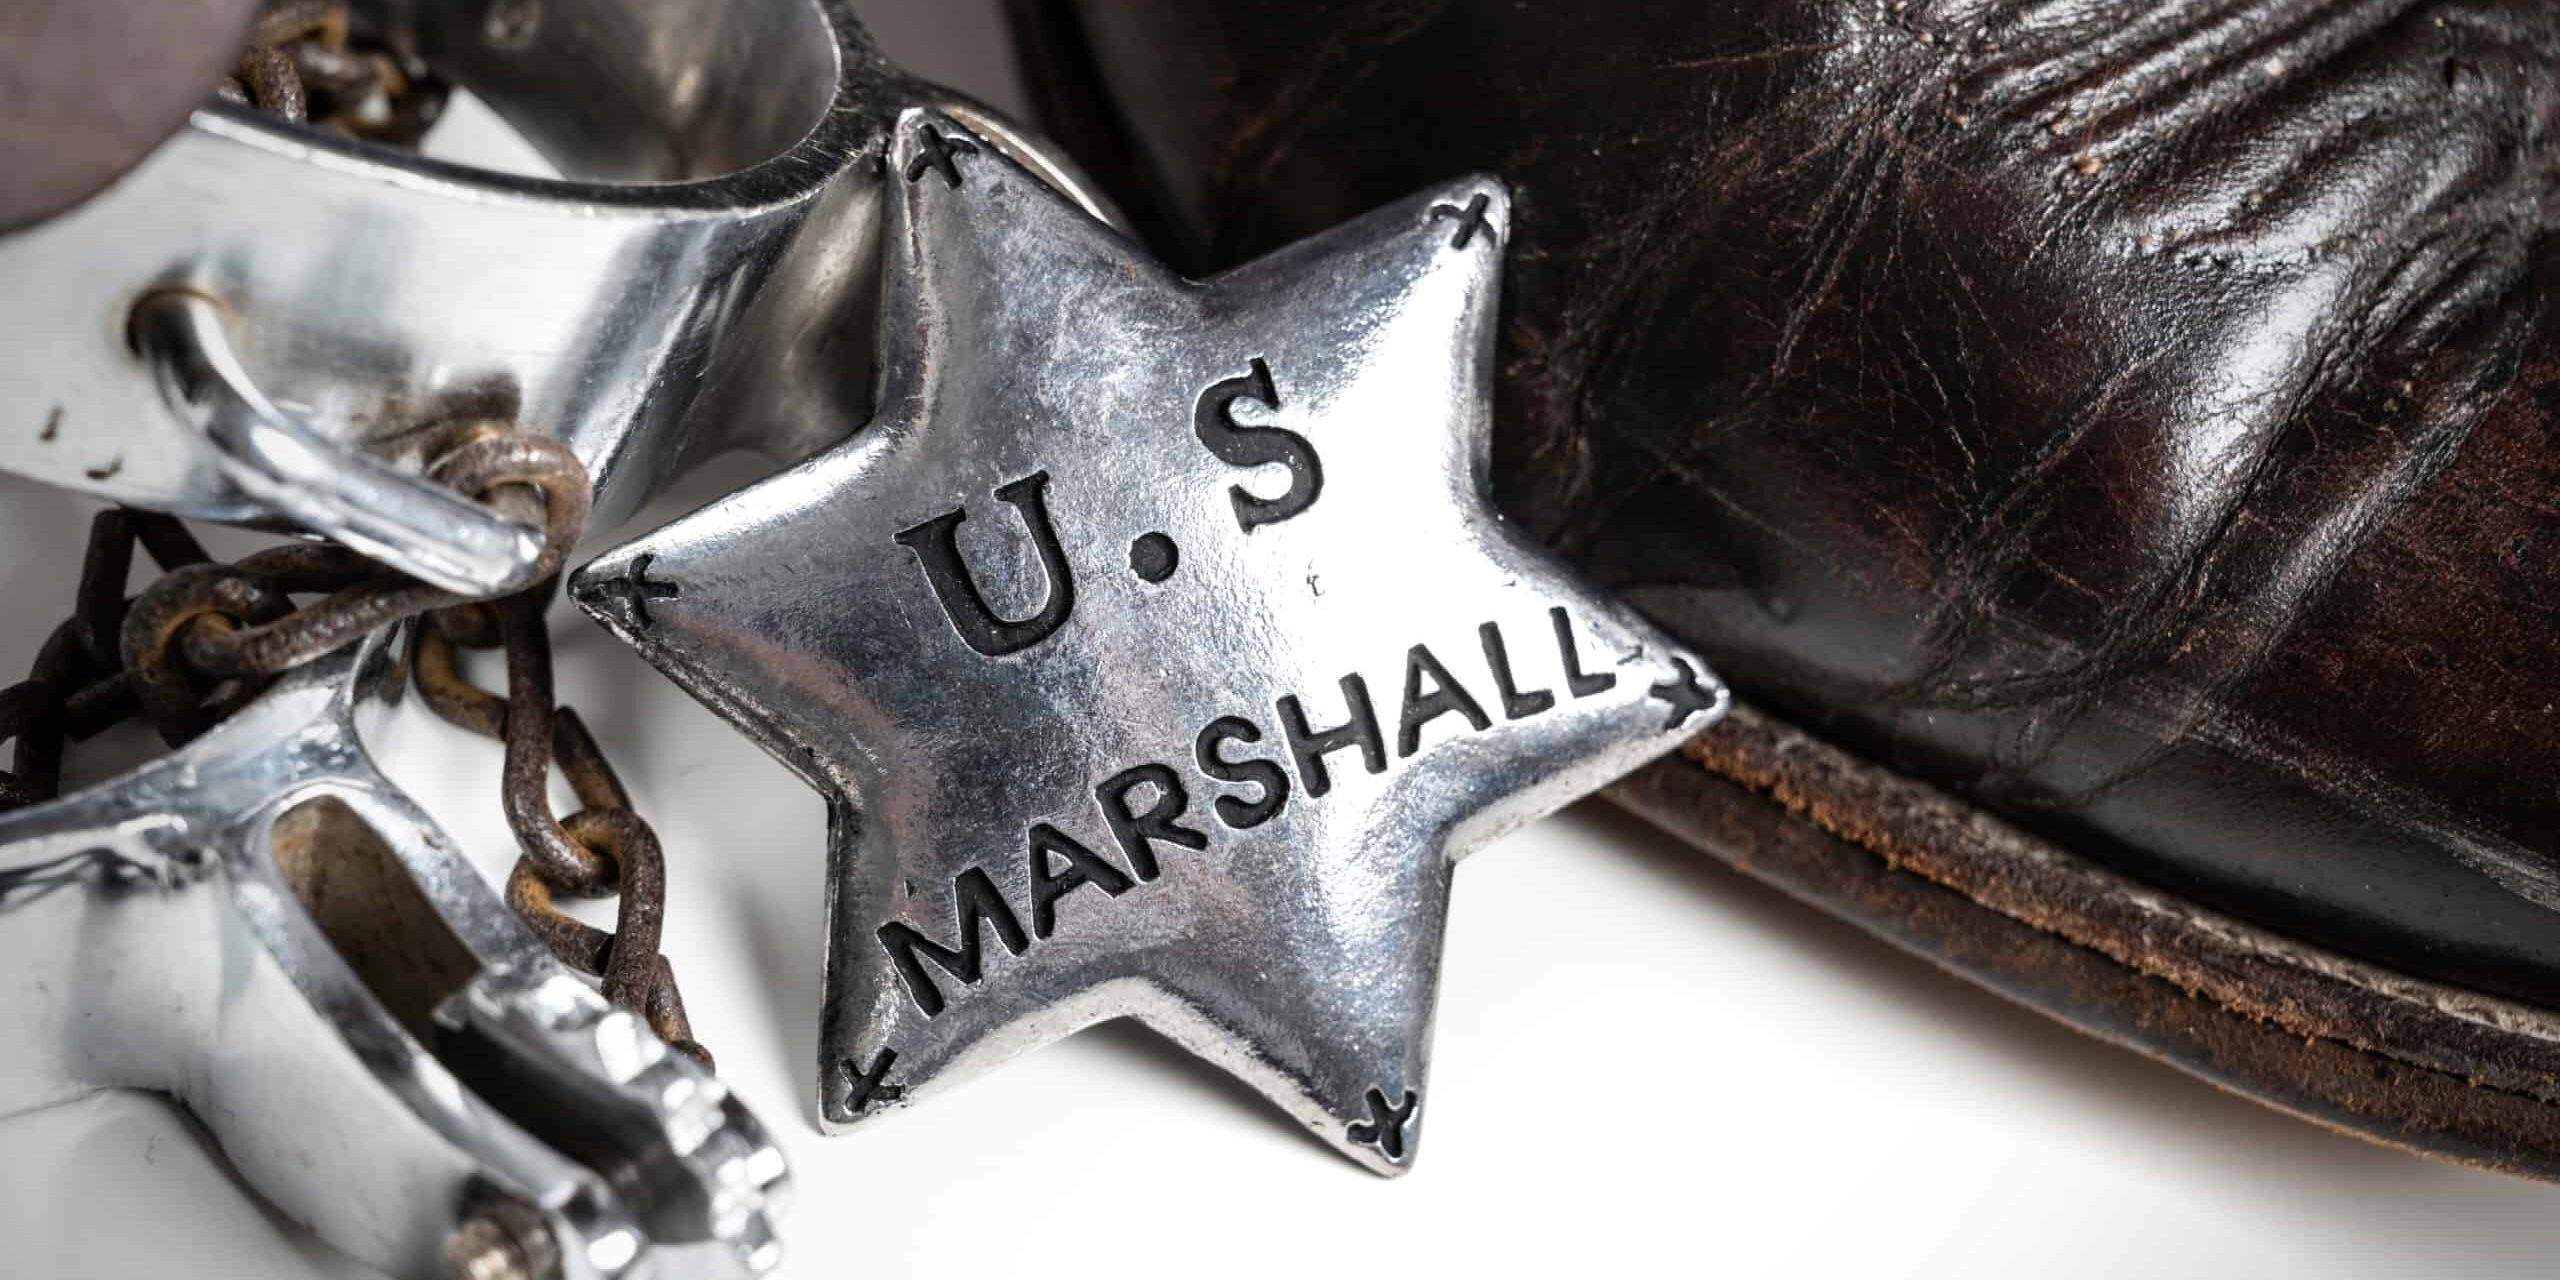 A group Of items old West themed items including United States Marshalls badge with cowboy boots and spurs